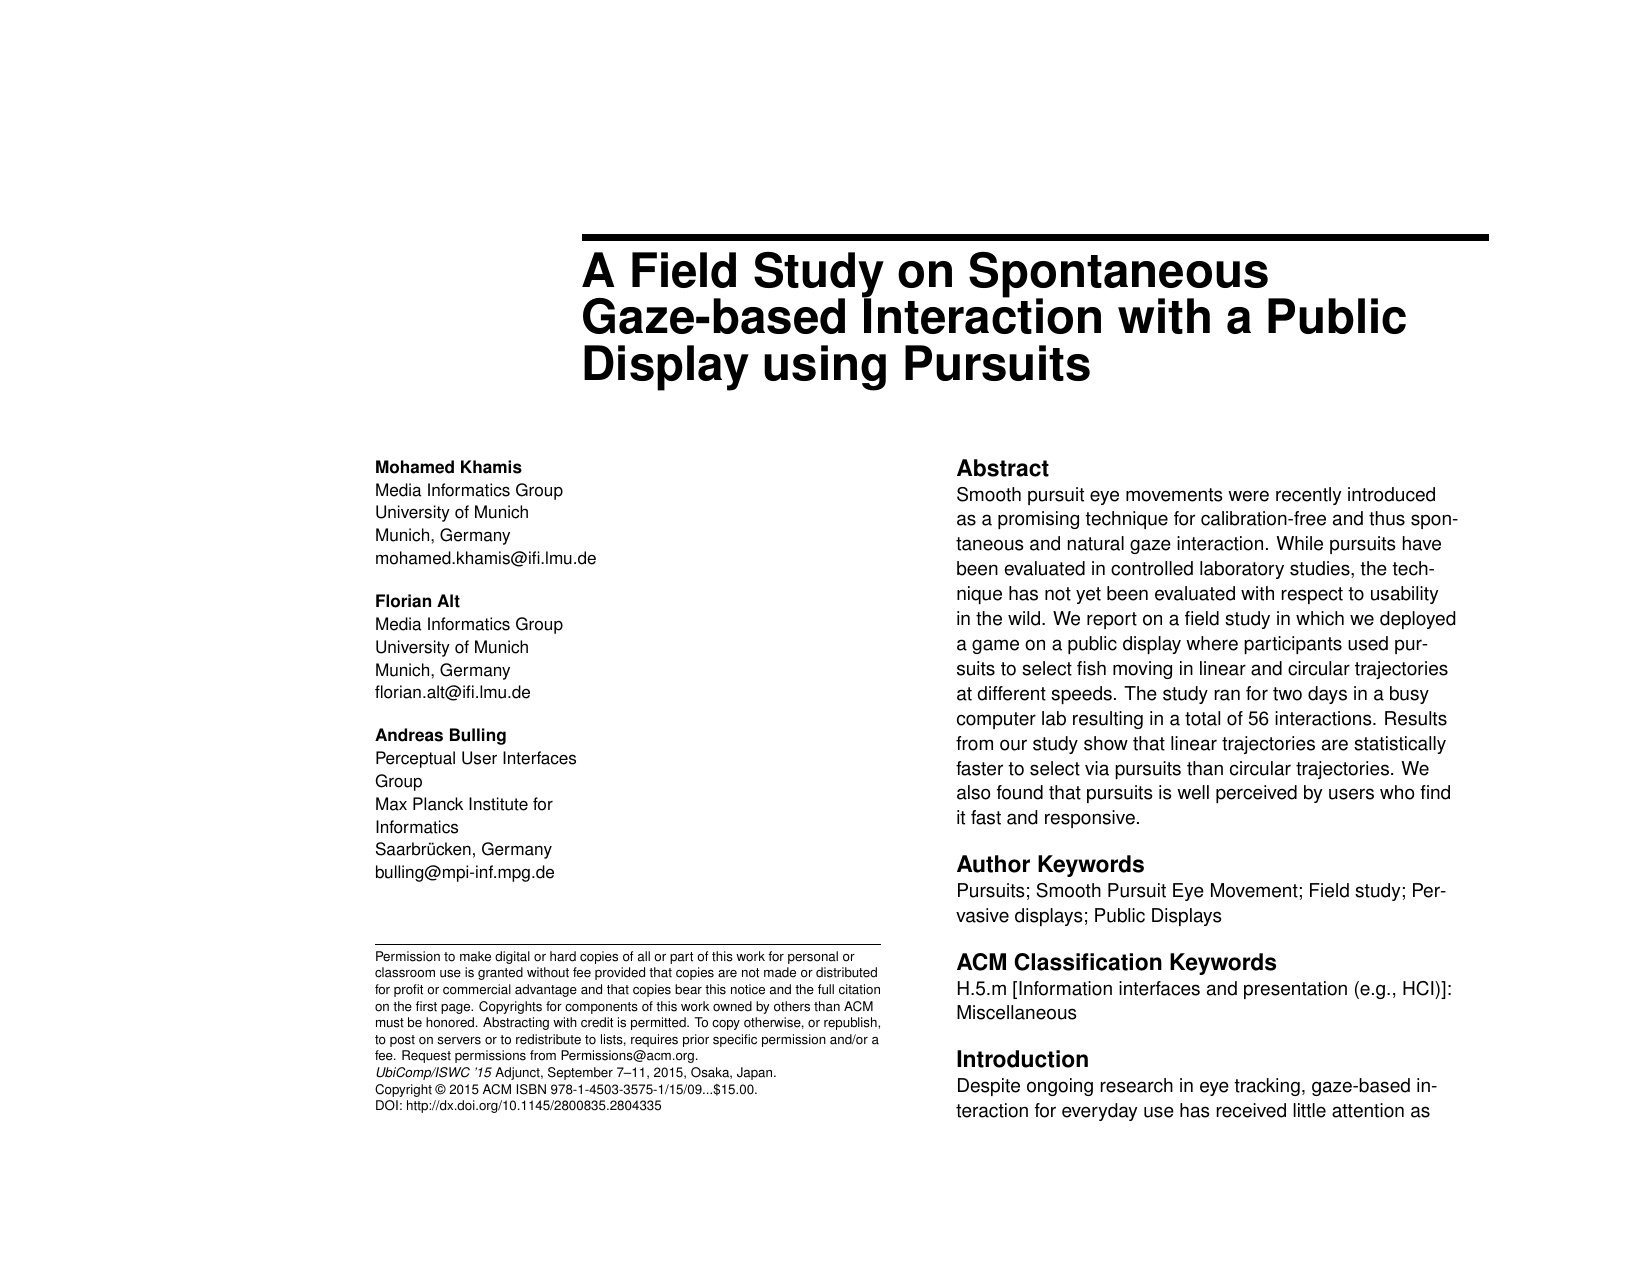 A Field Study on Spontaneous Gaze-based Interaction with a Public Display using Pursuits